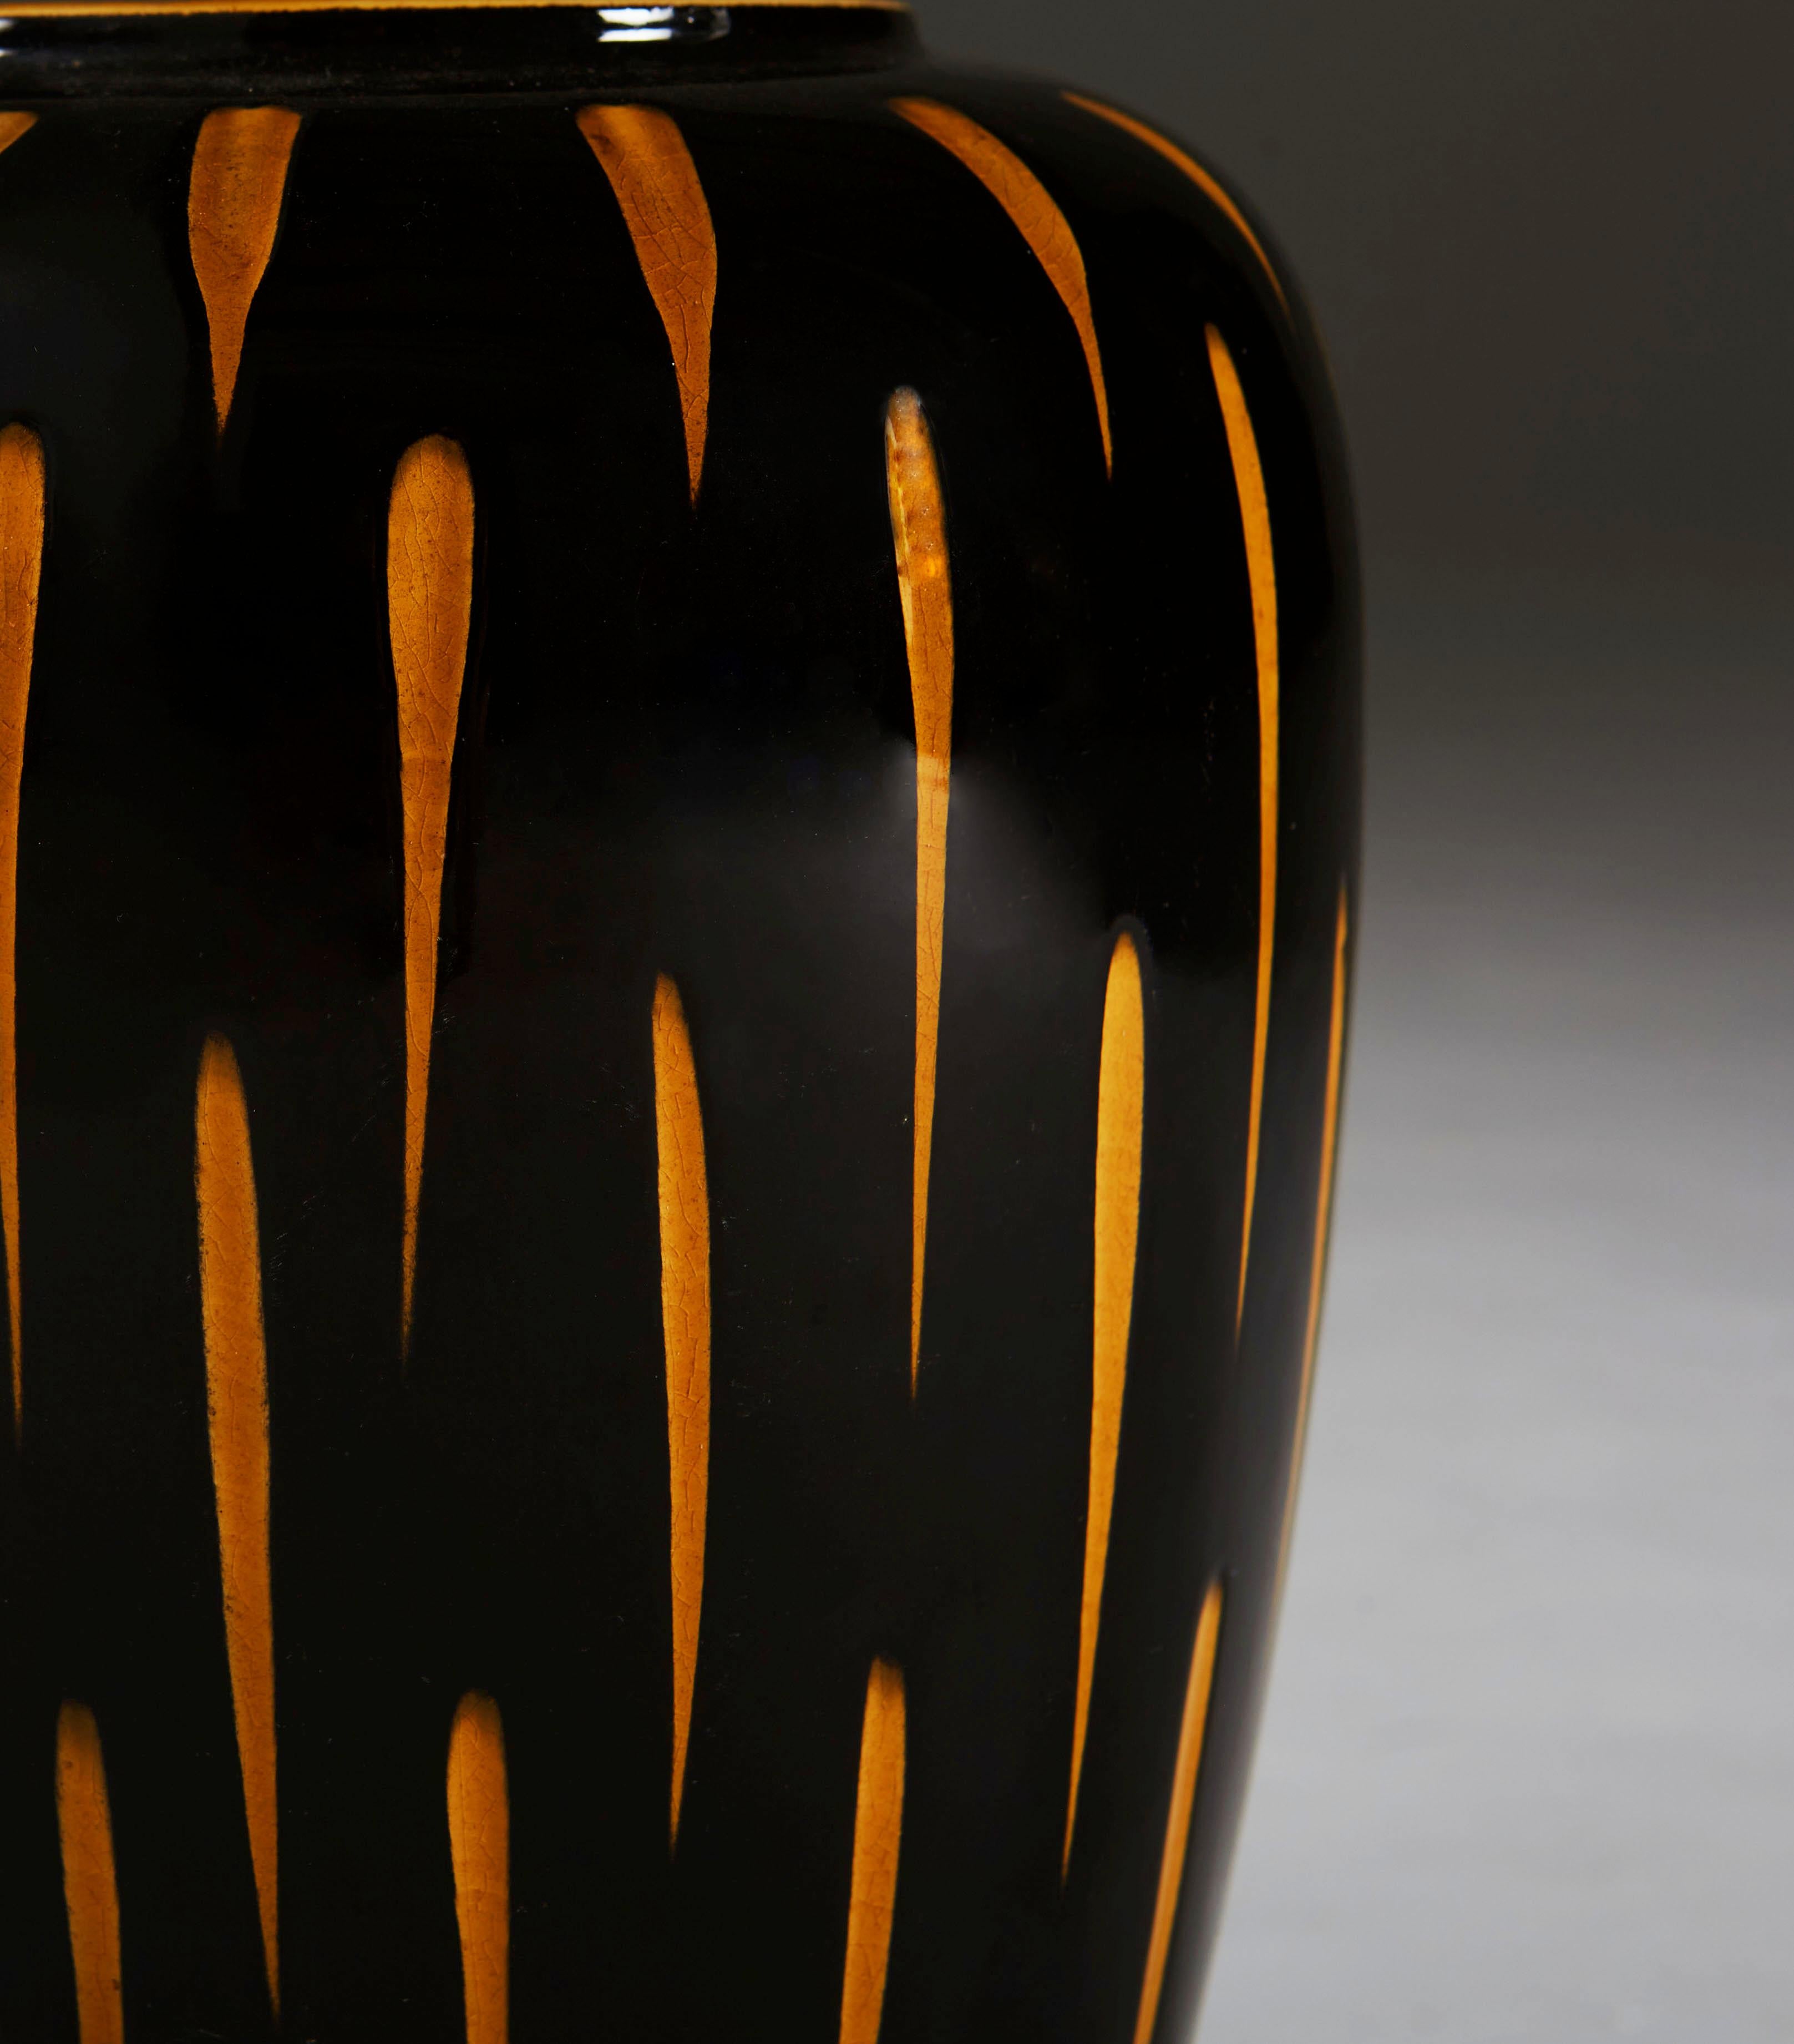 A mid-20th century Studio Pottery vase with black glaze layered over orange ground, the black glaze scraped away in dashes to reveal the orange below. Now converted as a lamp.

Please note: Lampshade not included.

Currently wired for the UK.